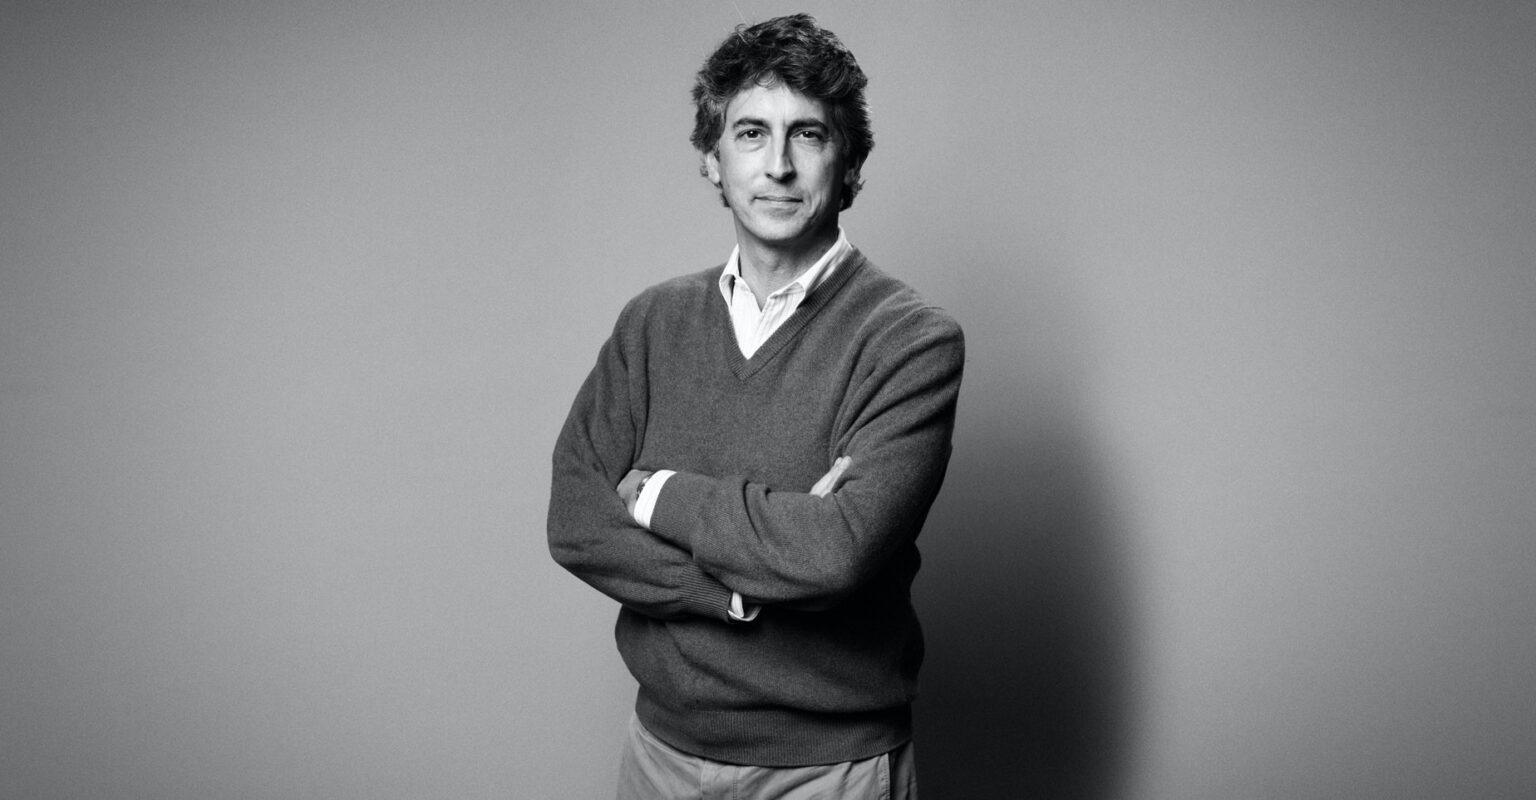 The two-time Academy Award-winning director Alexander Payne is bringing us a new film and his own insights on the current film industry and his career.